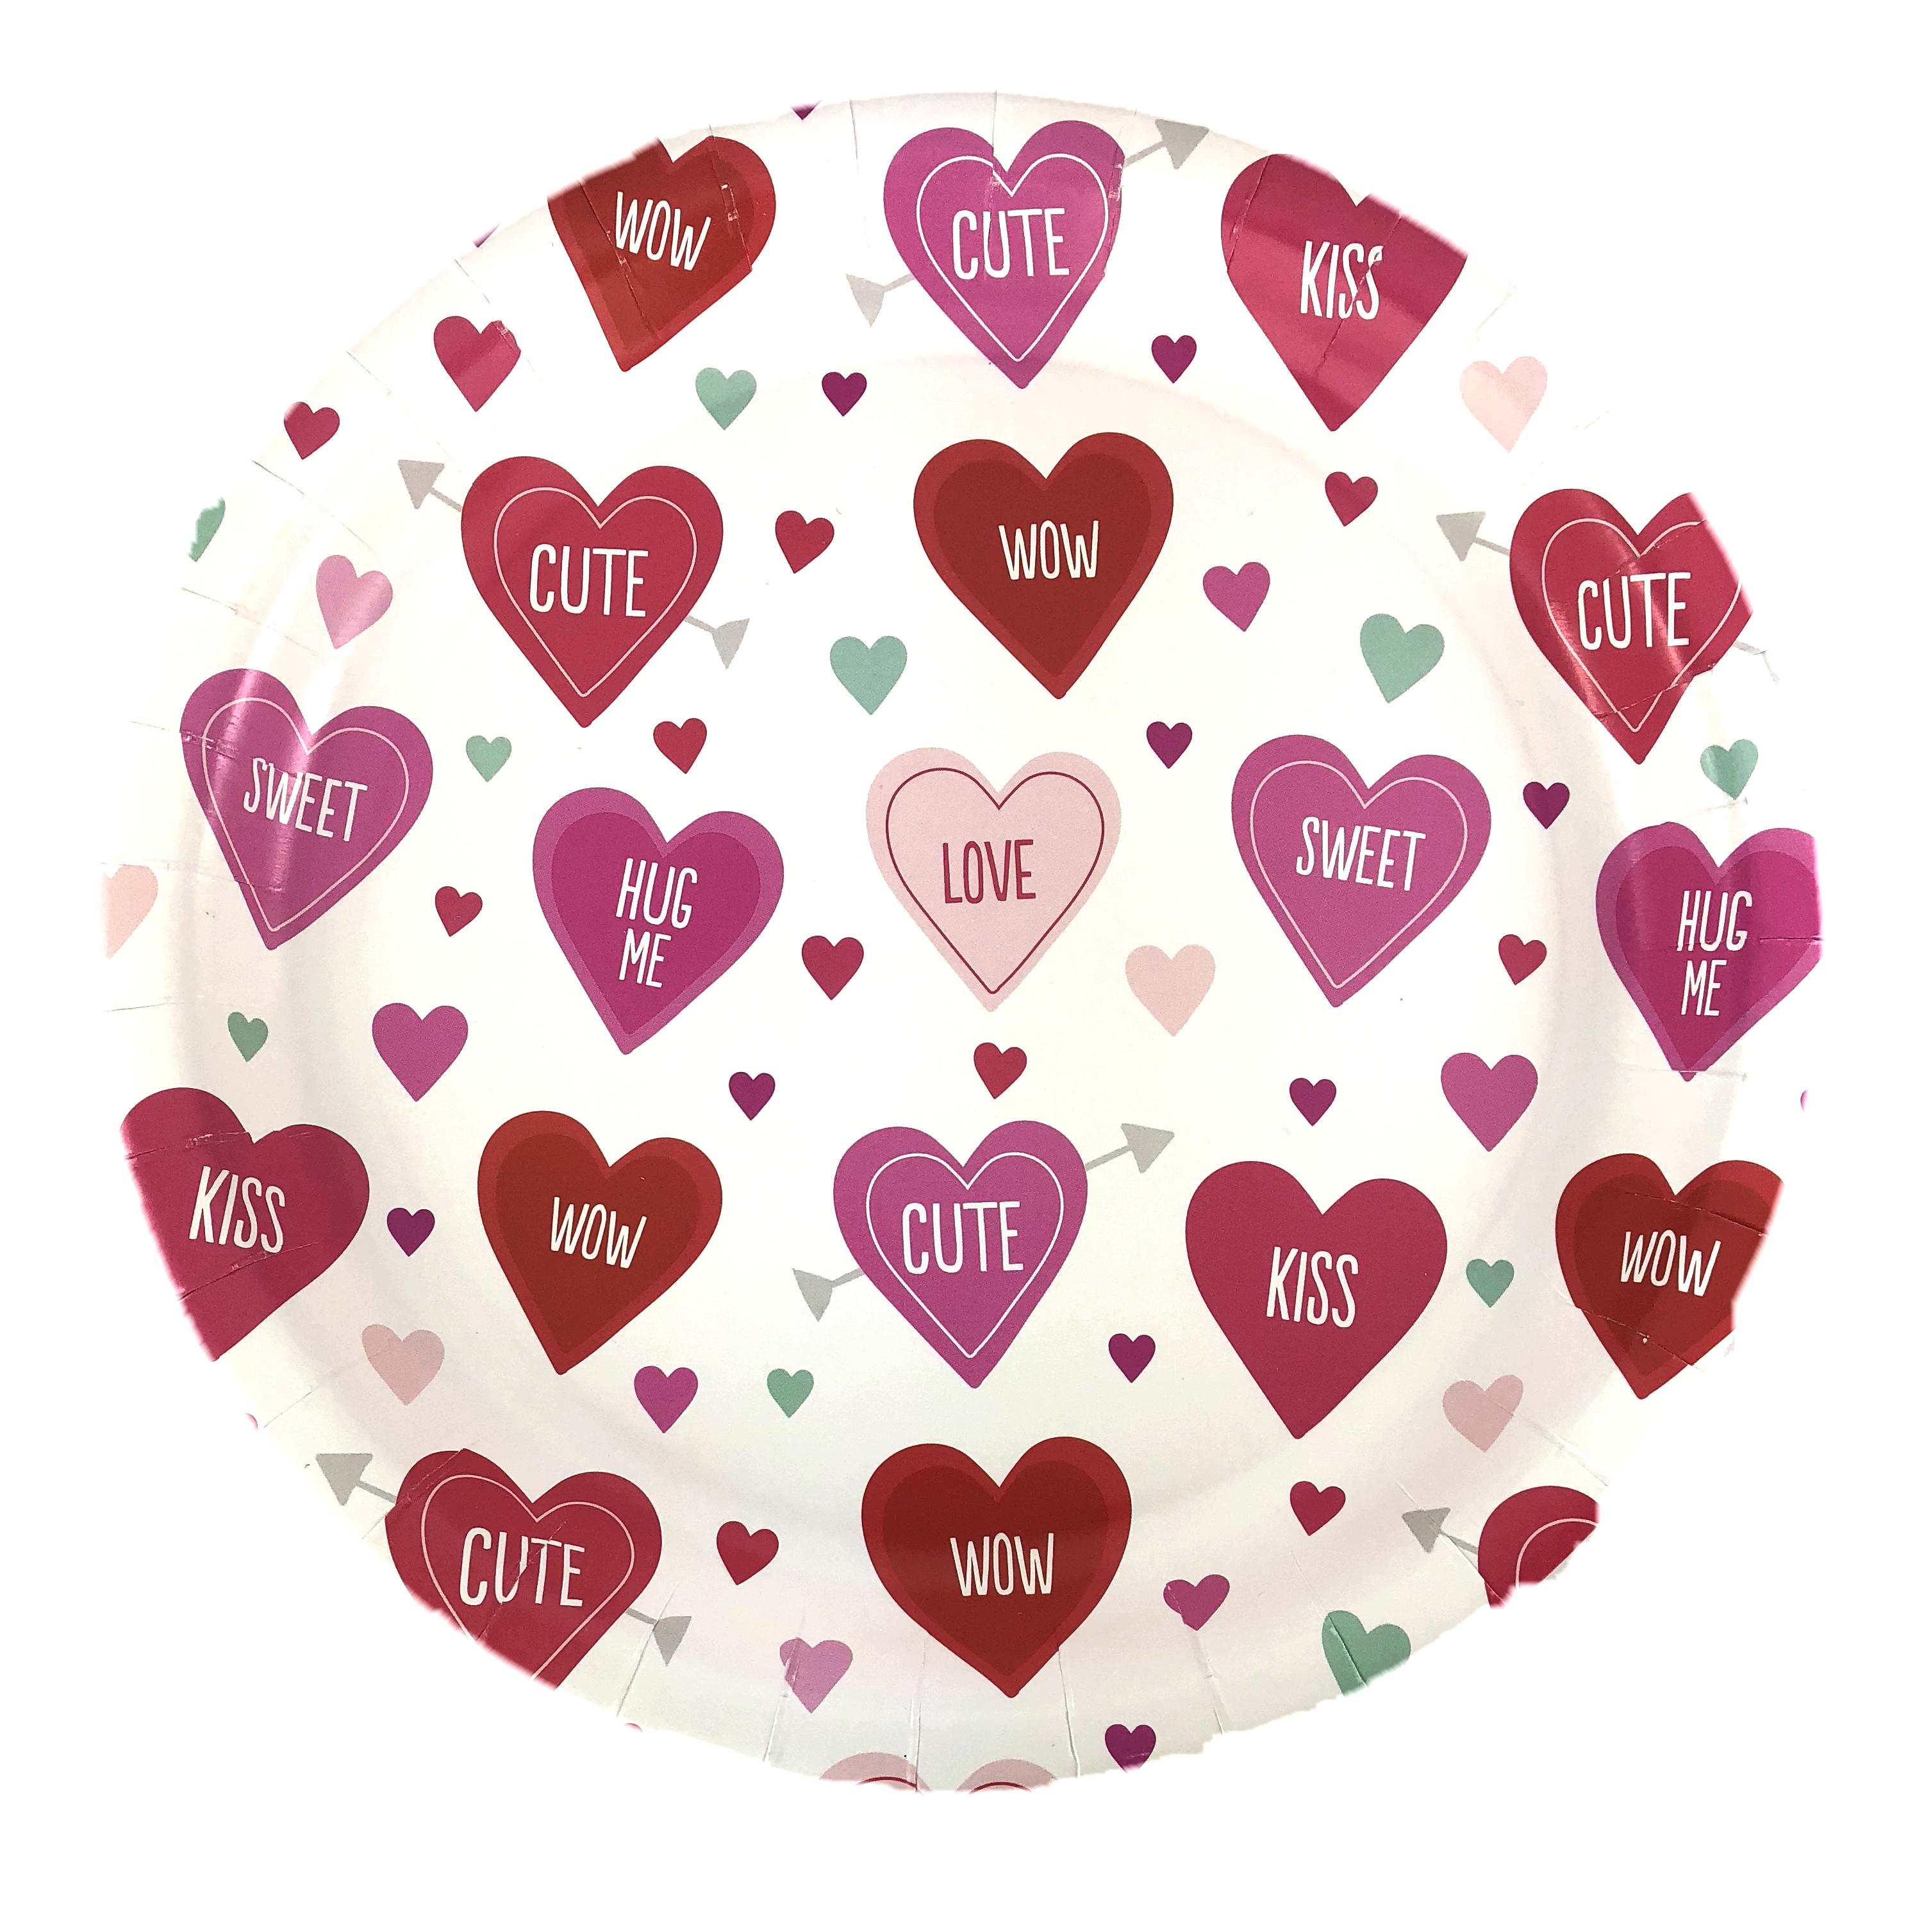 white plate with valentine's day heart featuring sweet, wow, love, hug me, cute